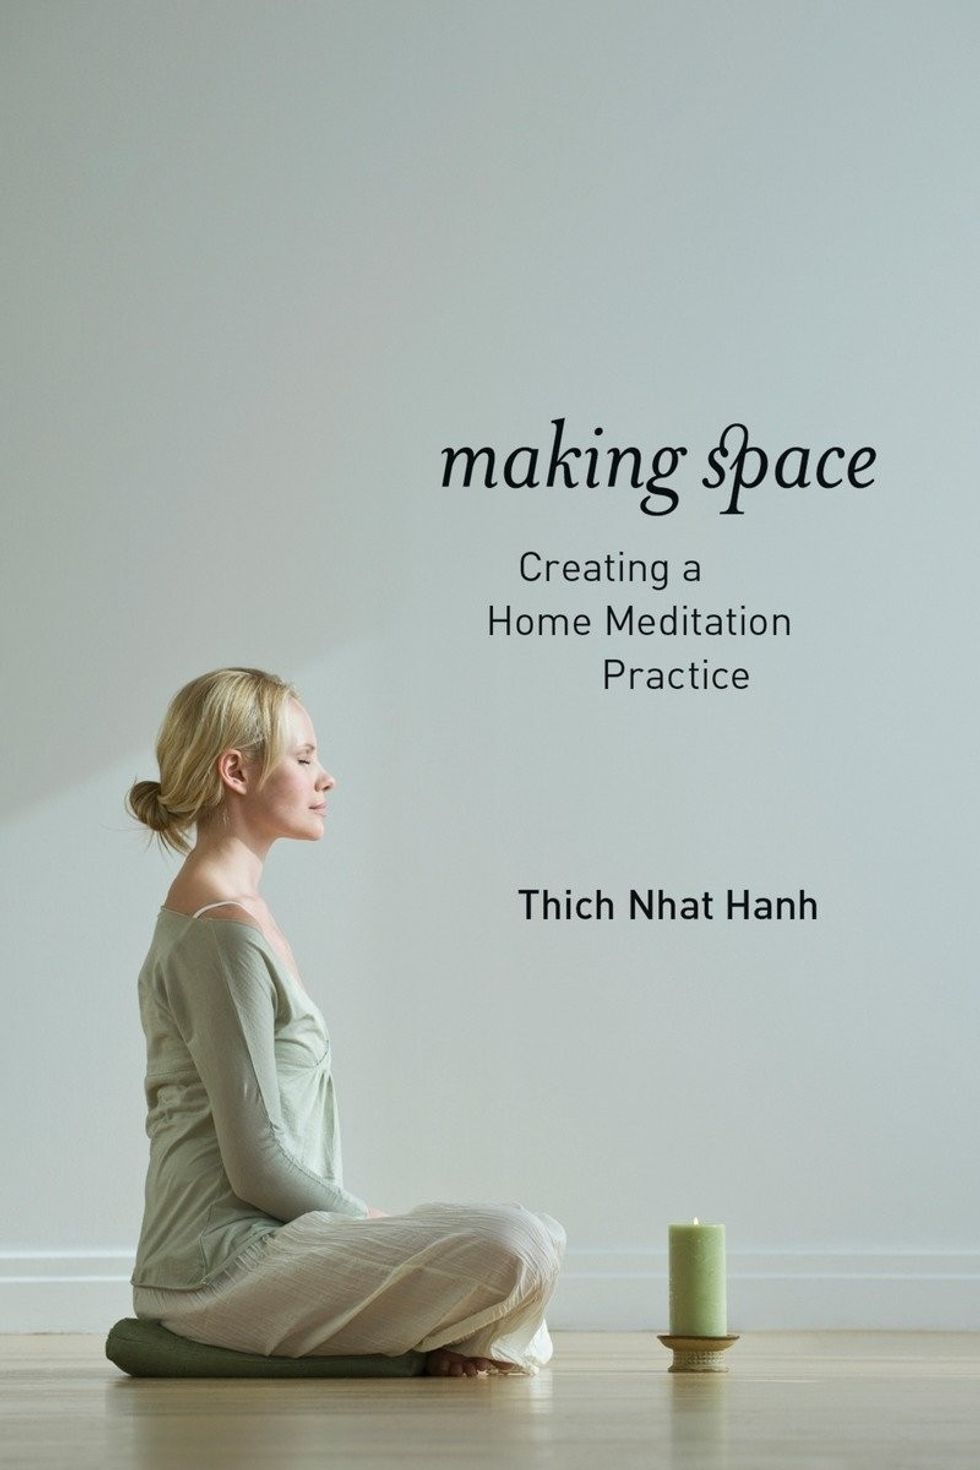 making-space-meditation-book-Thich-Nhat-Hanh